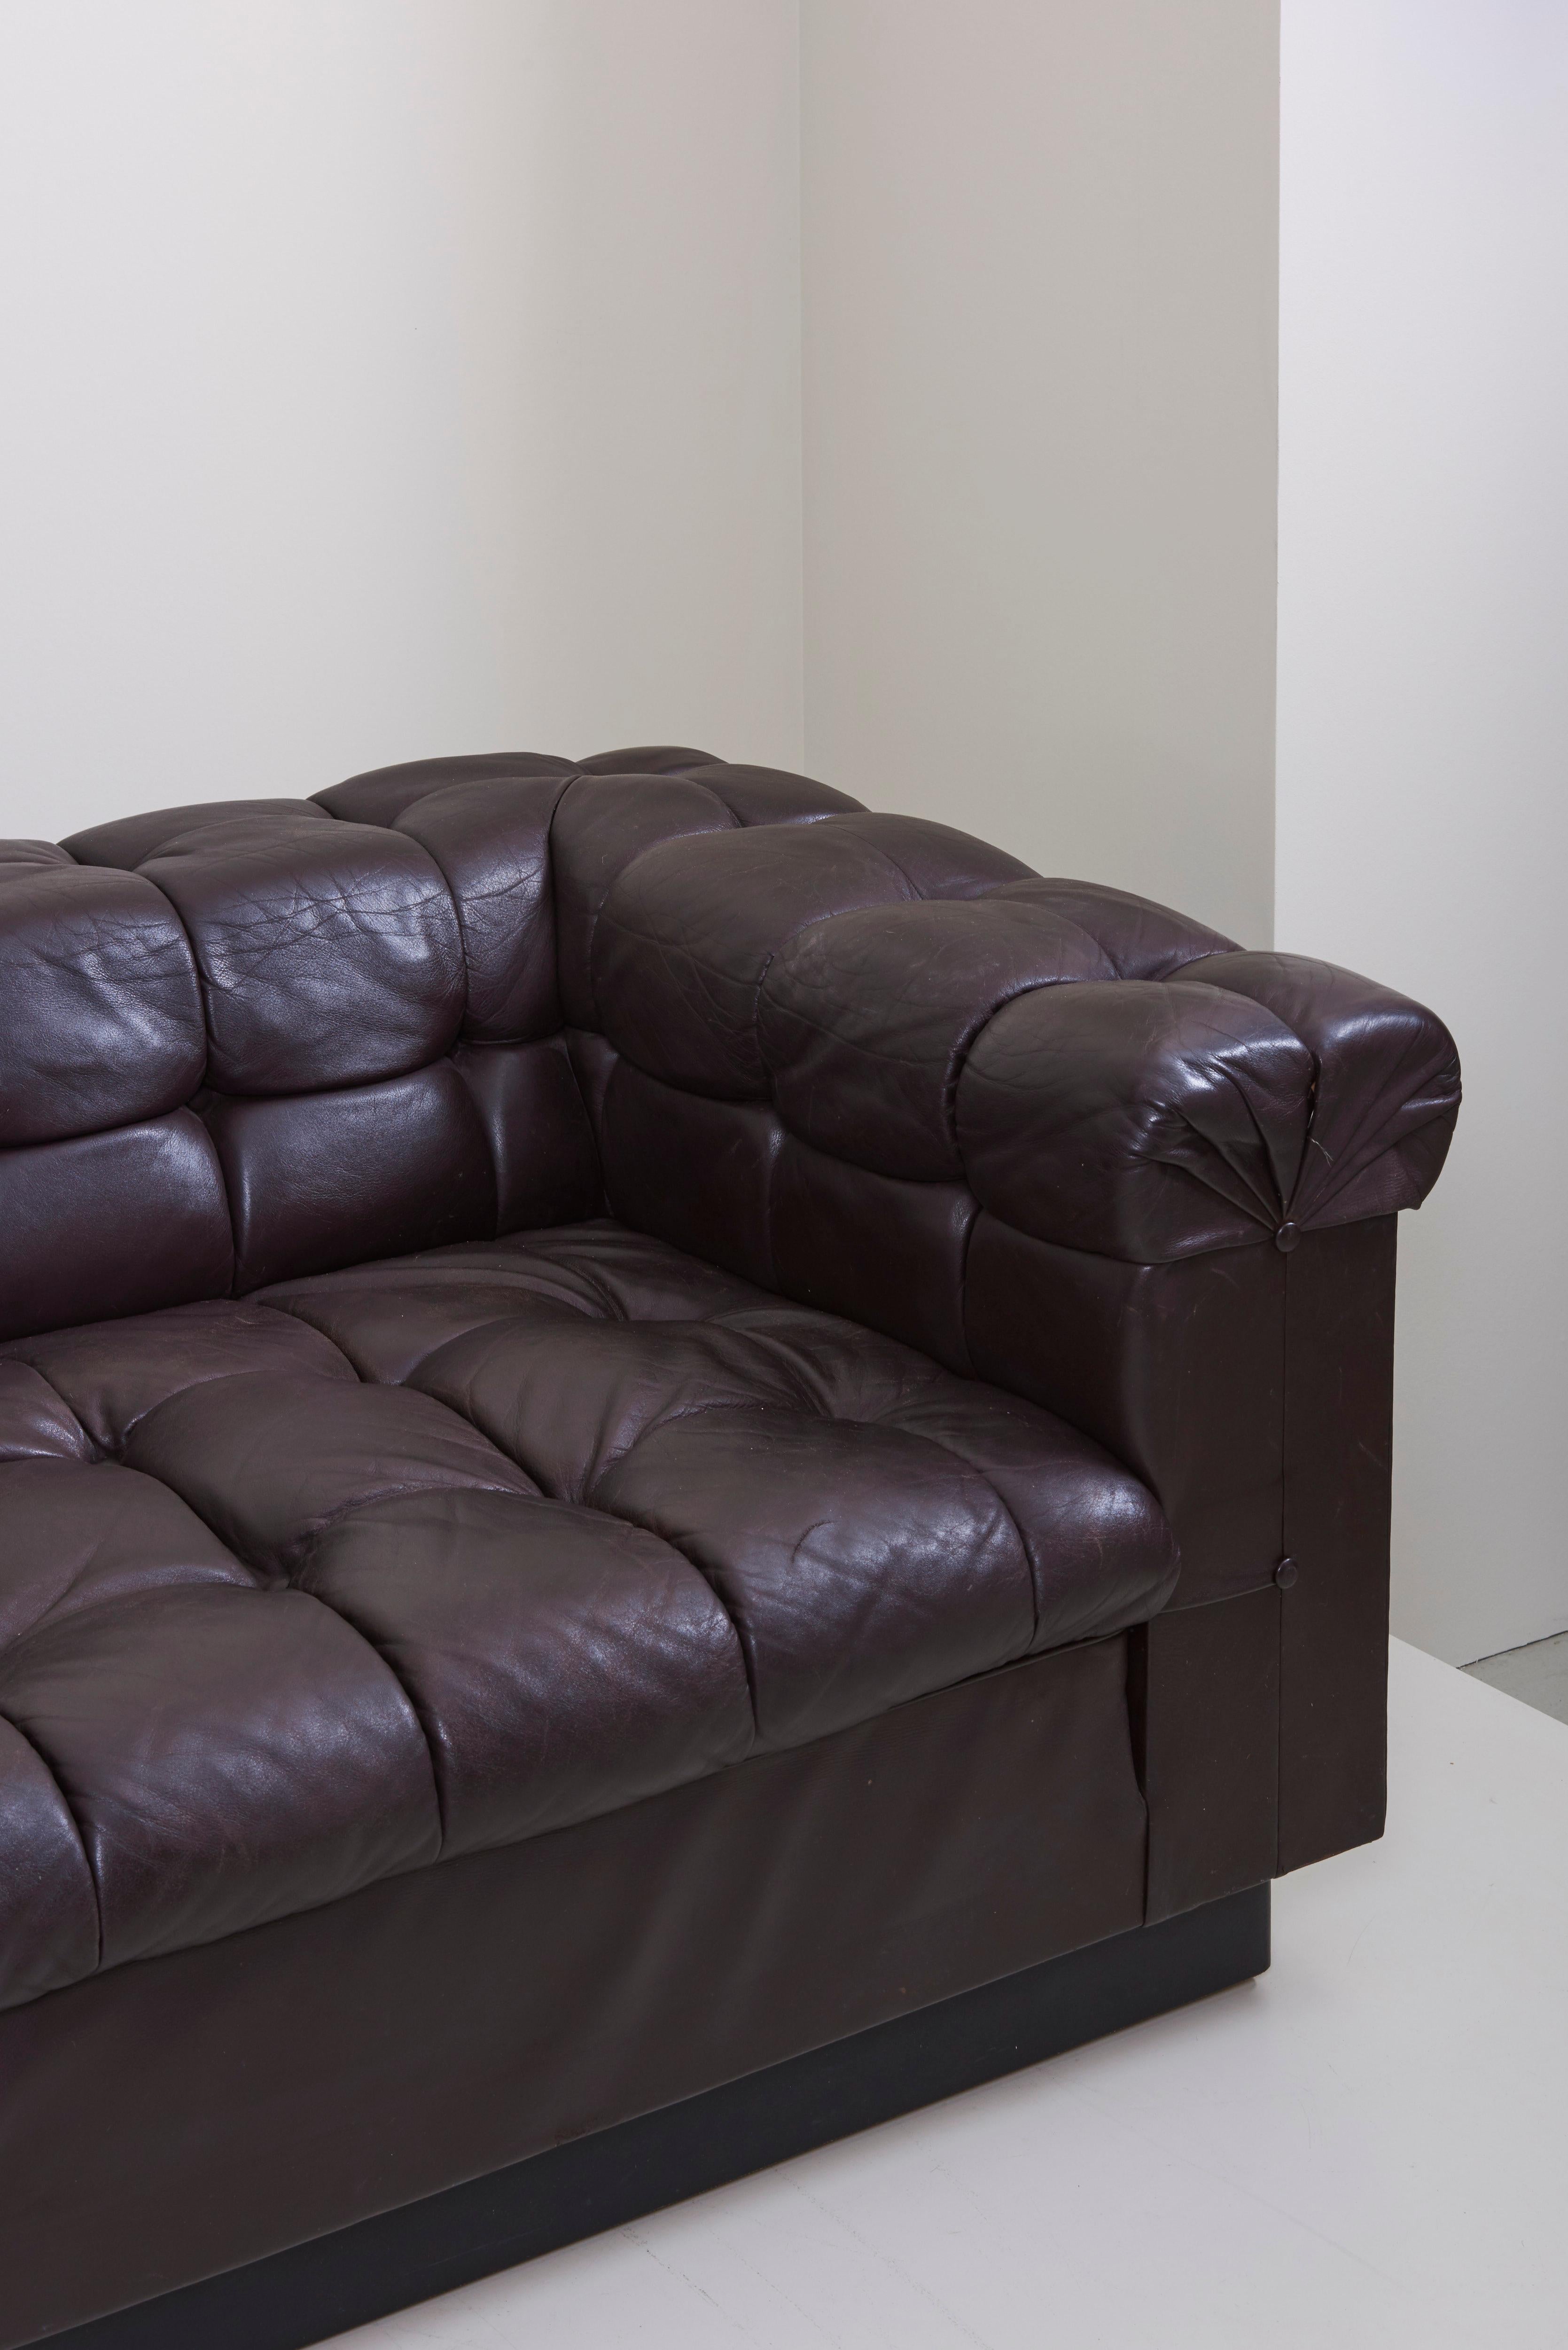 Party Sofa Model 5407 in Dark Brown Leather by Edward Wormley for Dunbar 1